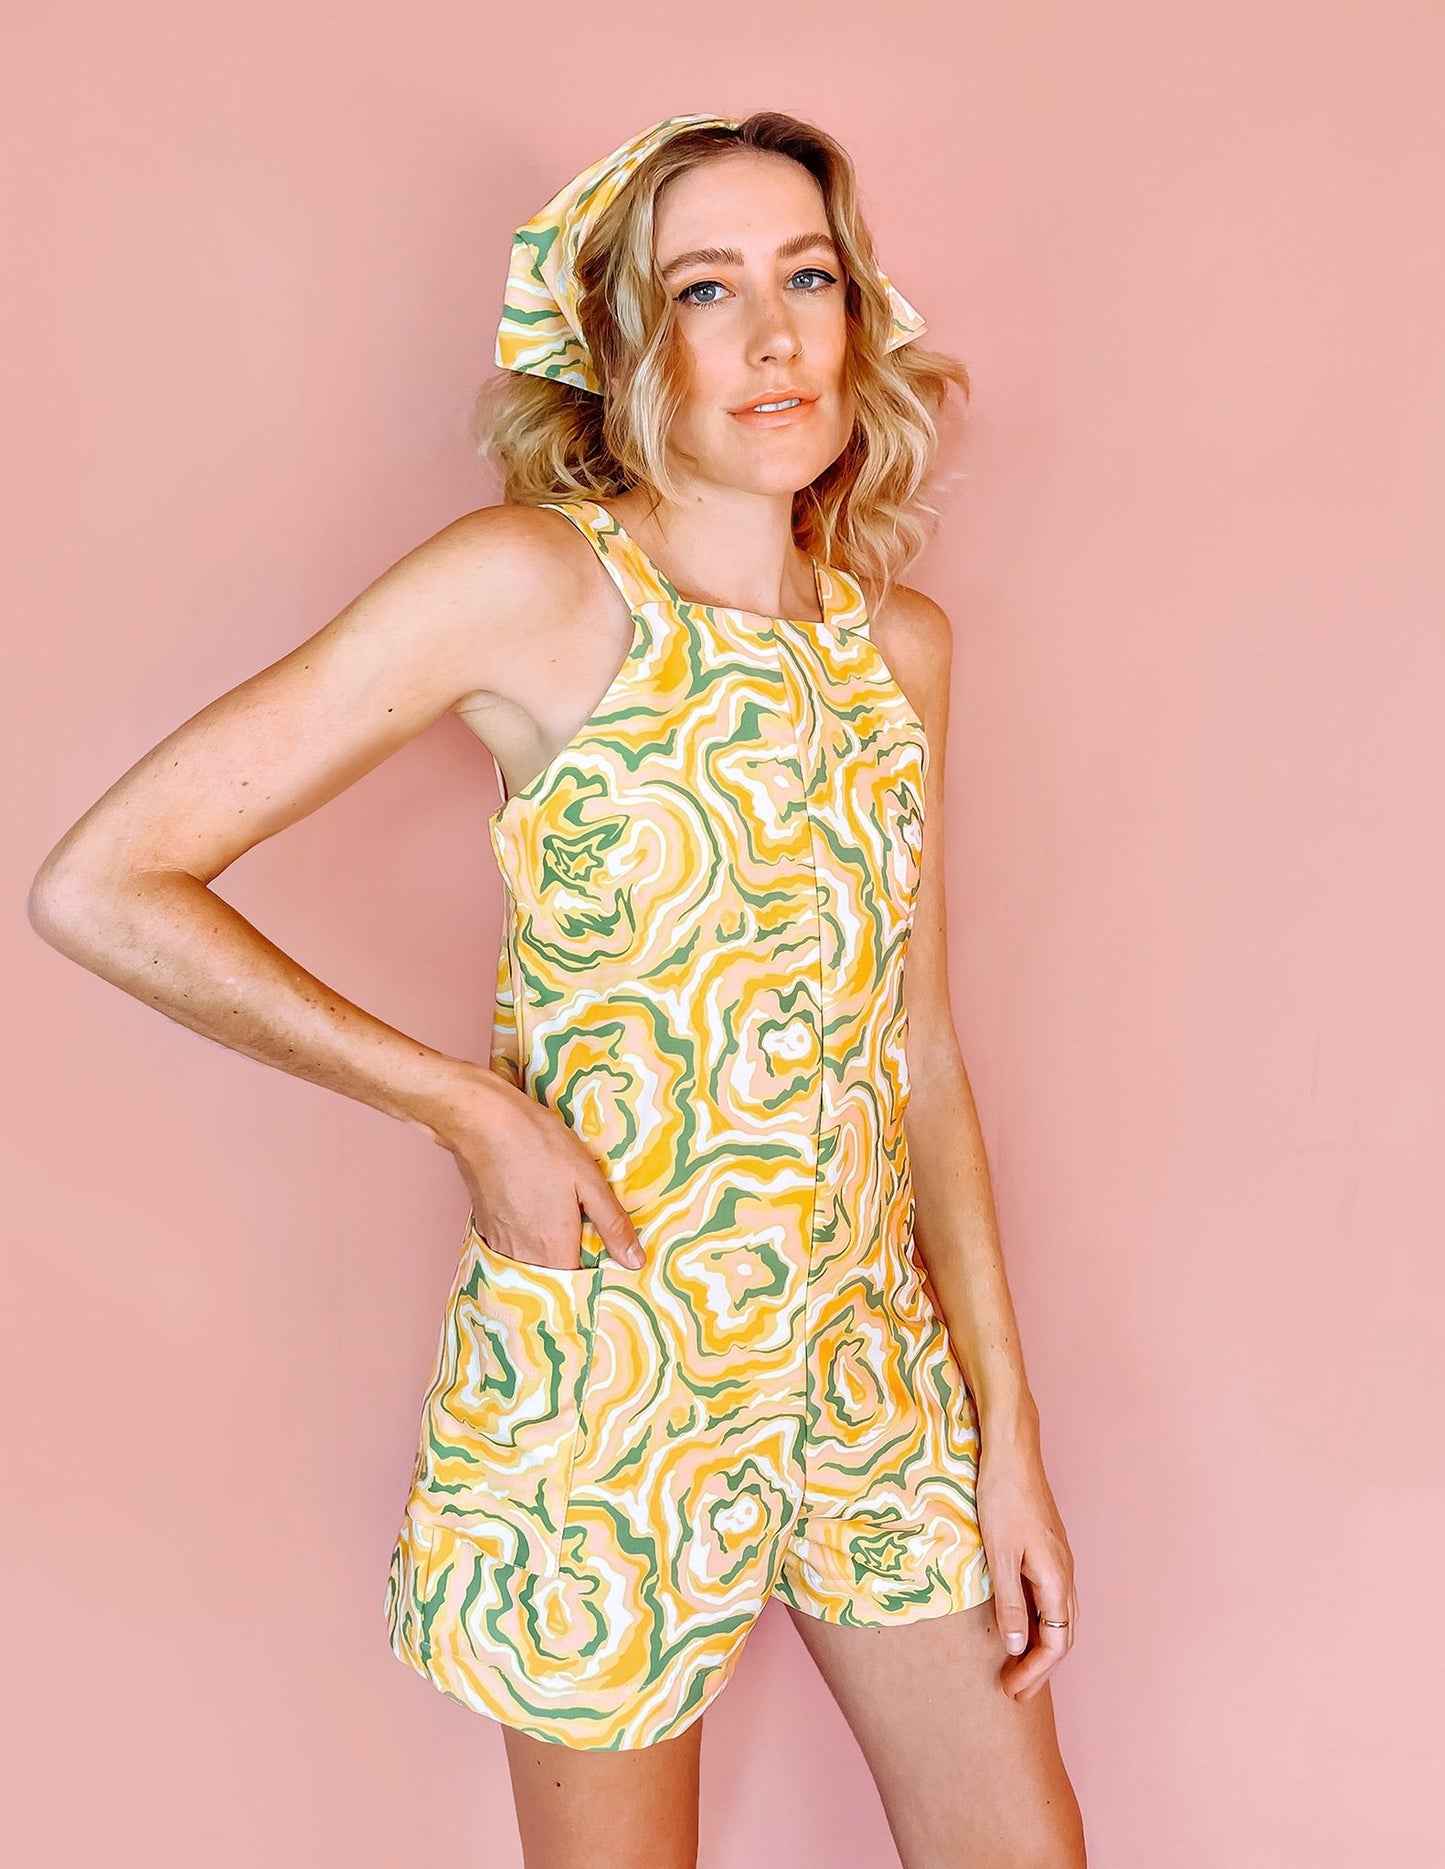 A woman wearing a yellow romper with green orange and white swirls on